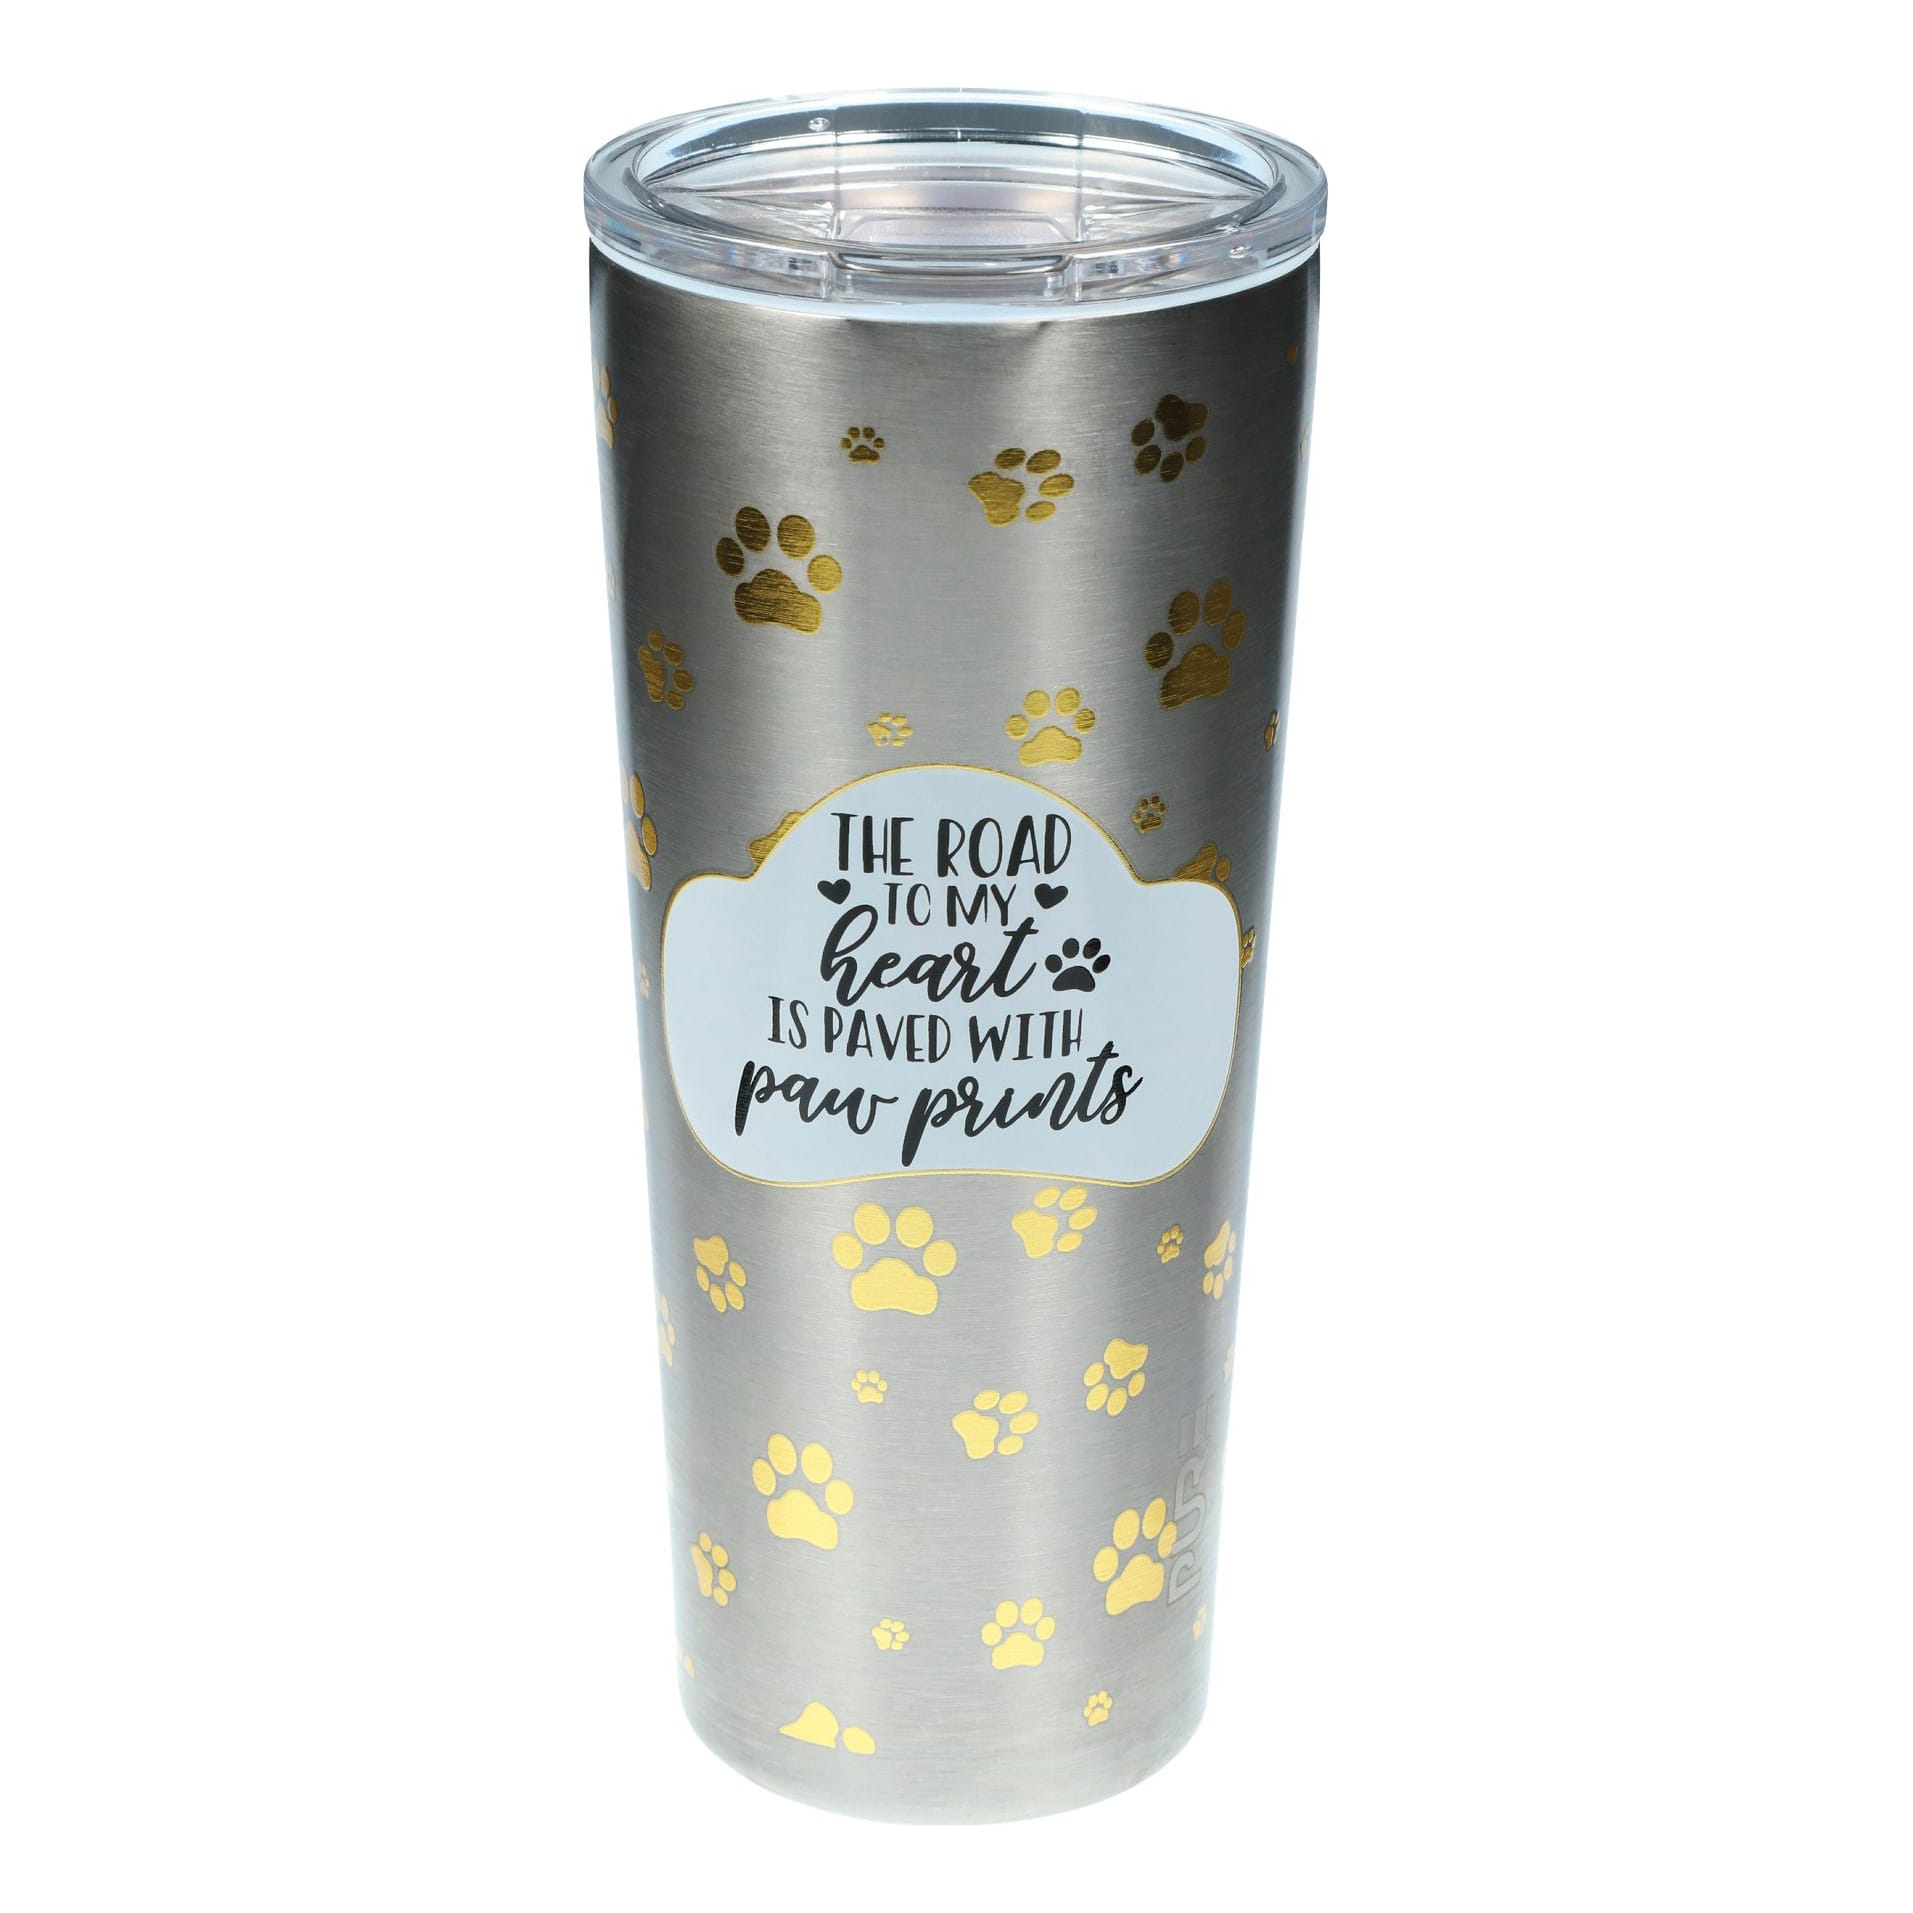 PURE Drinkware Paved with Paw Prints Stainless Steel 22 oz. Tumbler